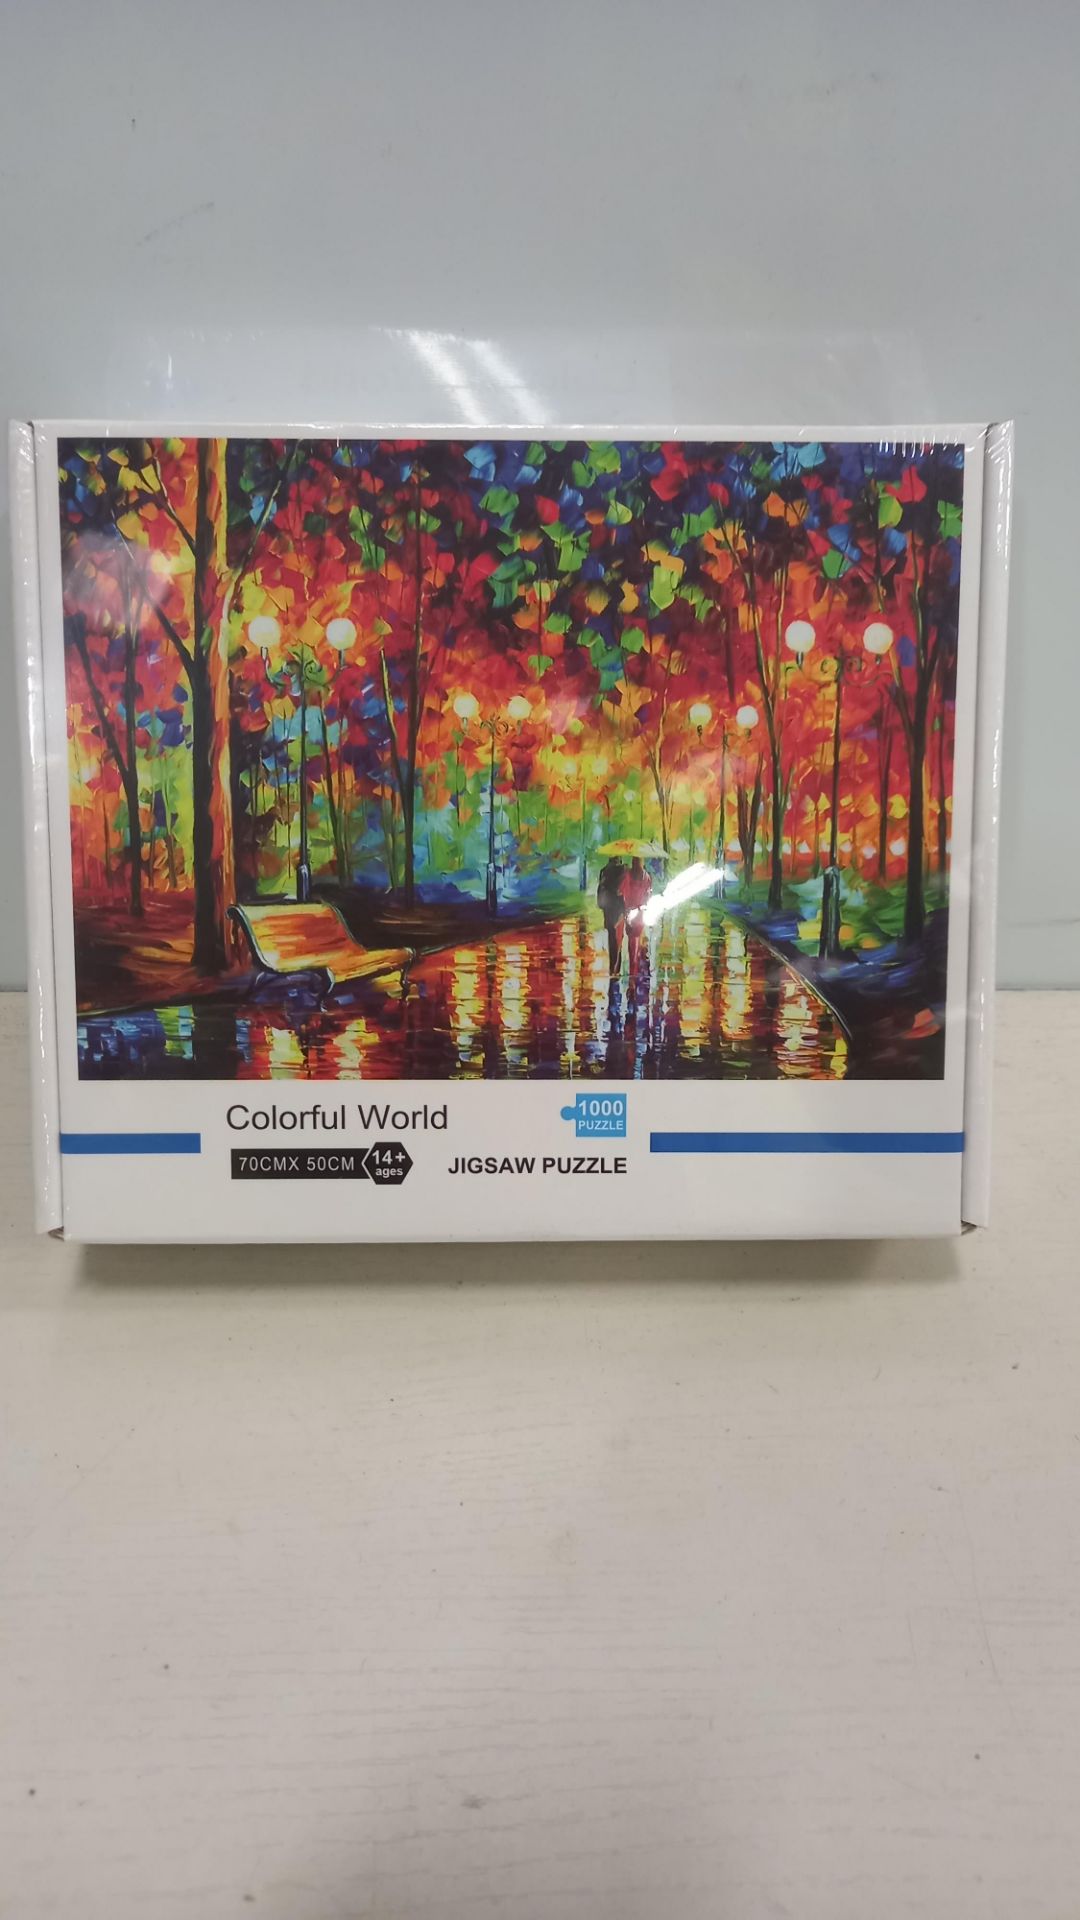 64 X BRAND NEW COLOURFUL WORLD JIGSAW PUZZLE ( 1000PIECE ) - 70CM X 50CM ( IN 2 BOXES )